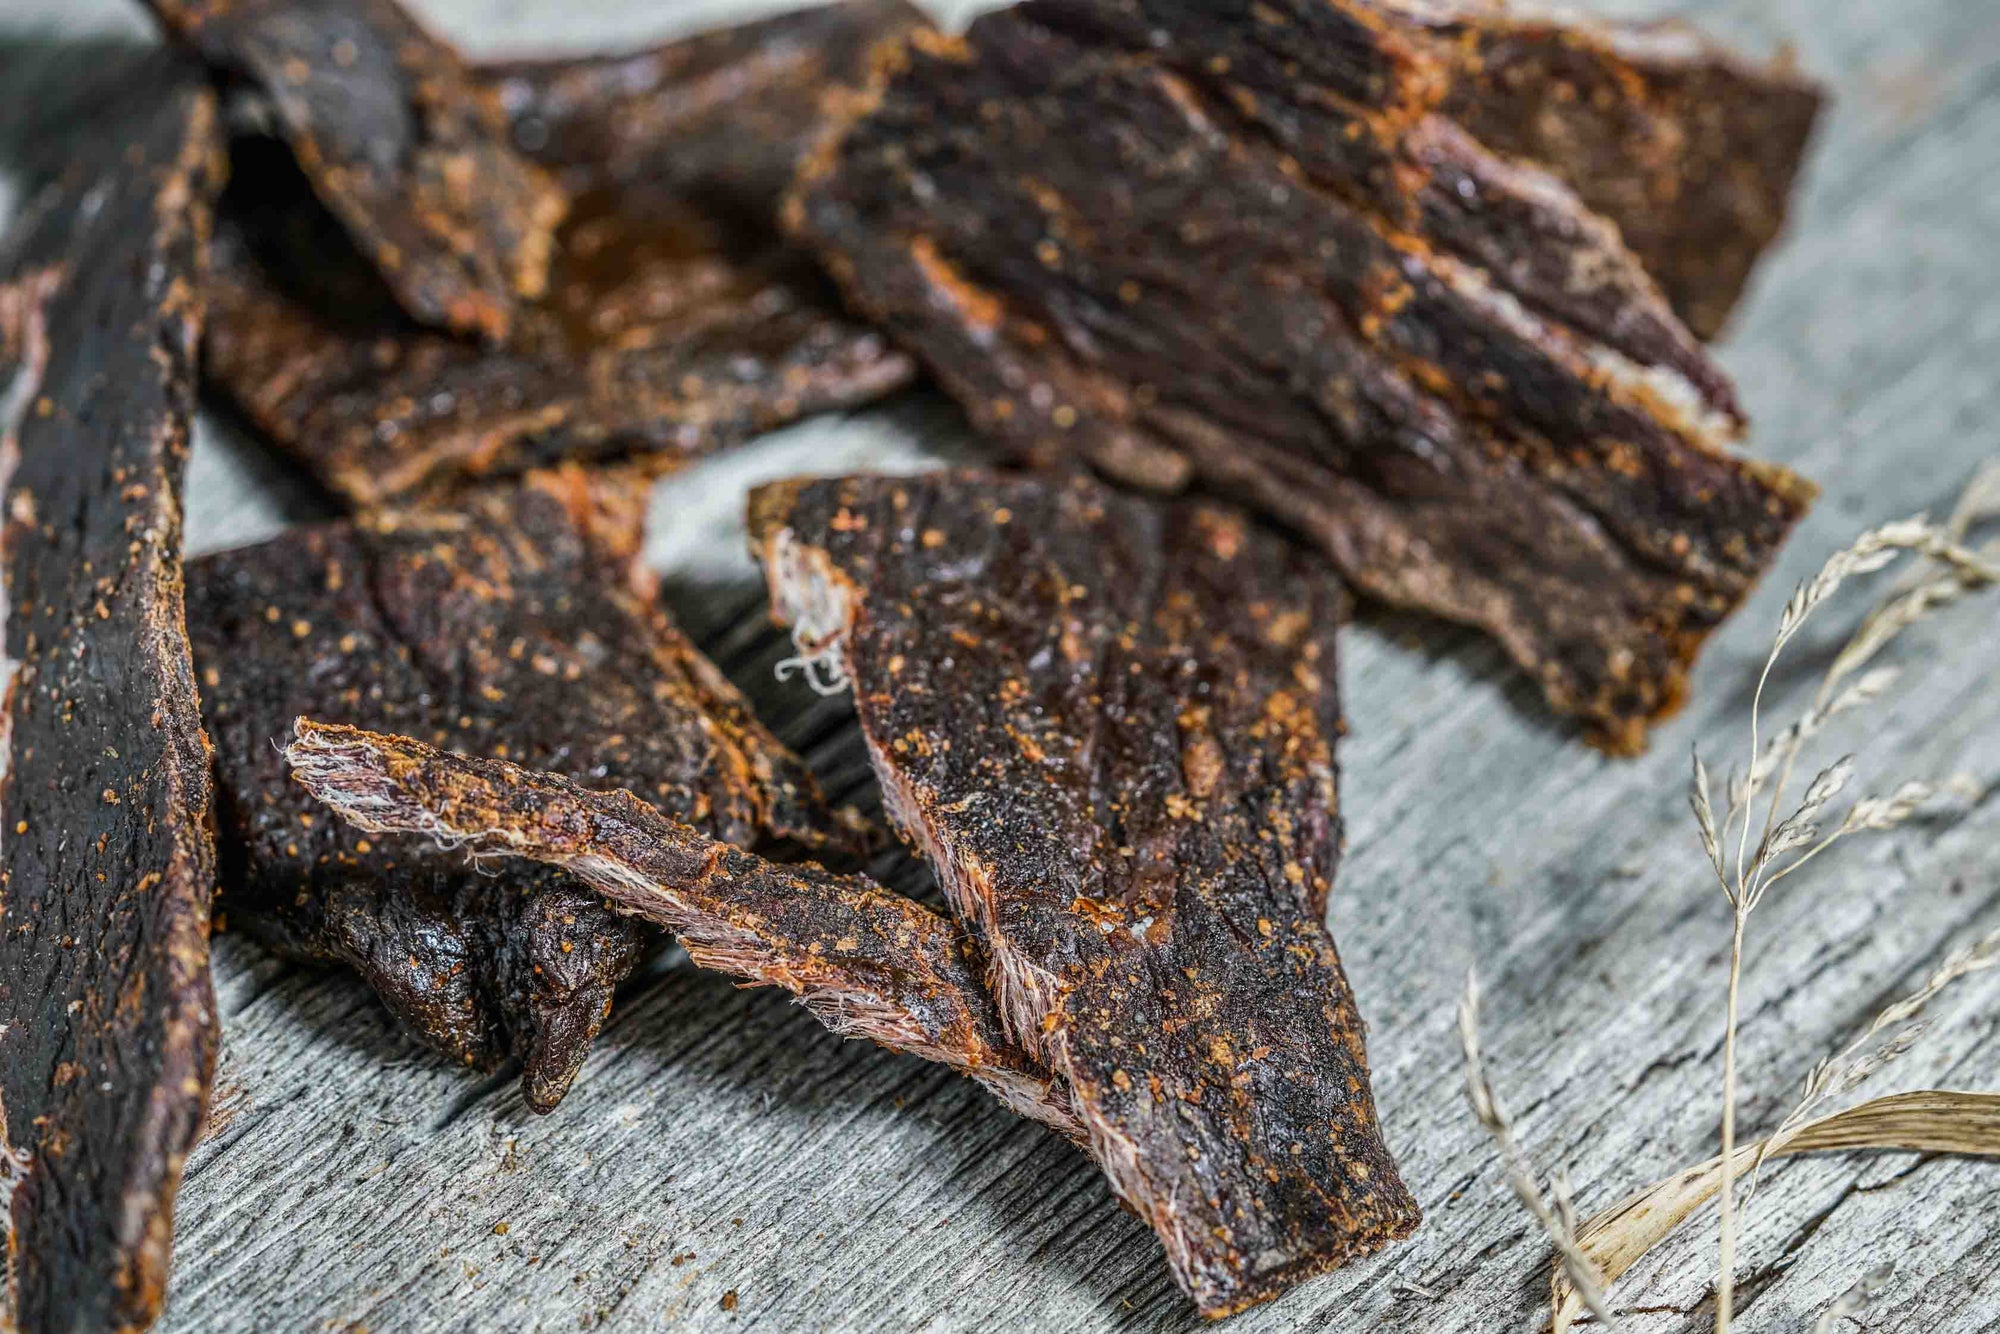 100% grass fed and finished beef jerky Northstar bison clean lean mean cattle cow dried meat gut health celiac protein regenerate non-gmo no preservatives corn free gluten free soy free